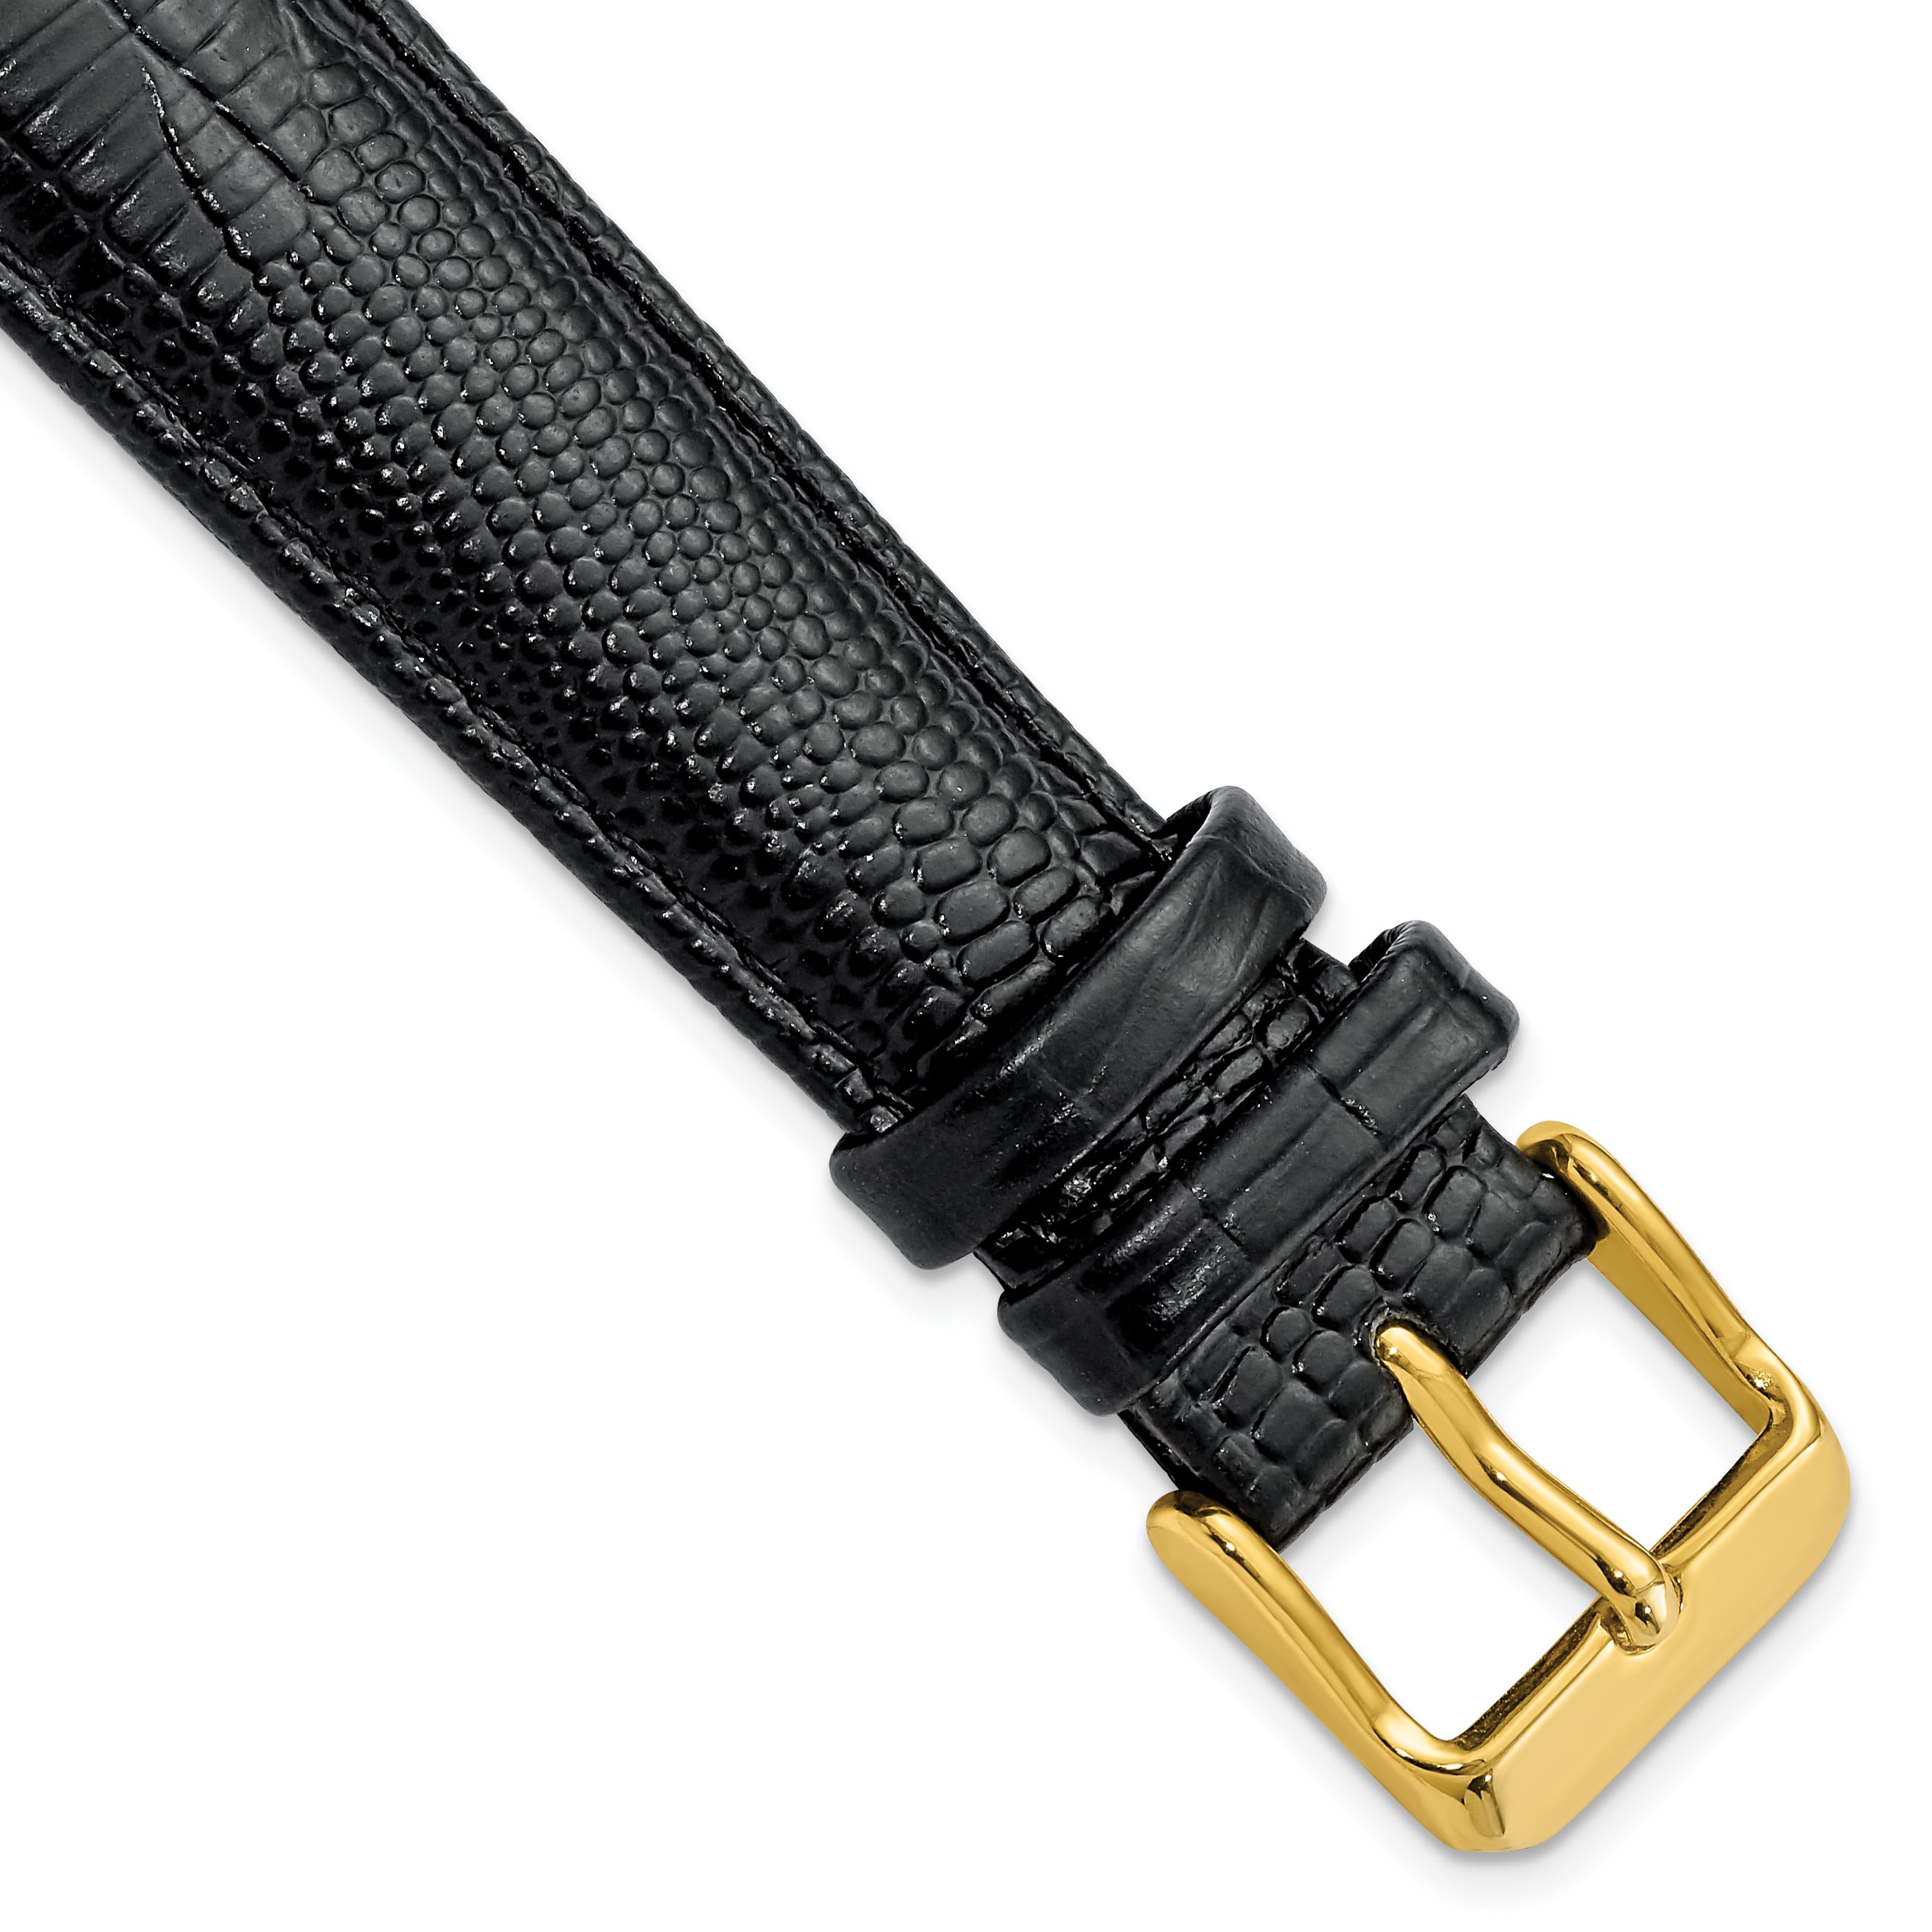 DeBeer 19mm Black Teju Liz Grain Leather with Gold-tone Buckle 7.5 inch Watch Band